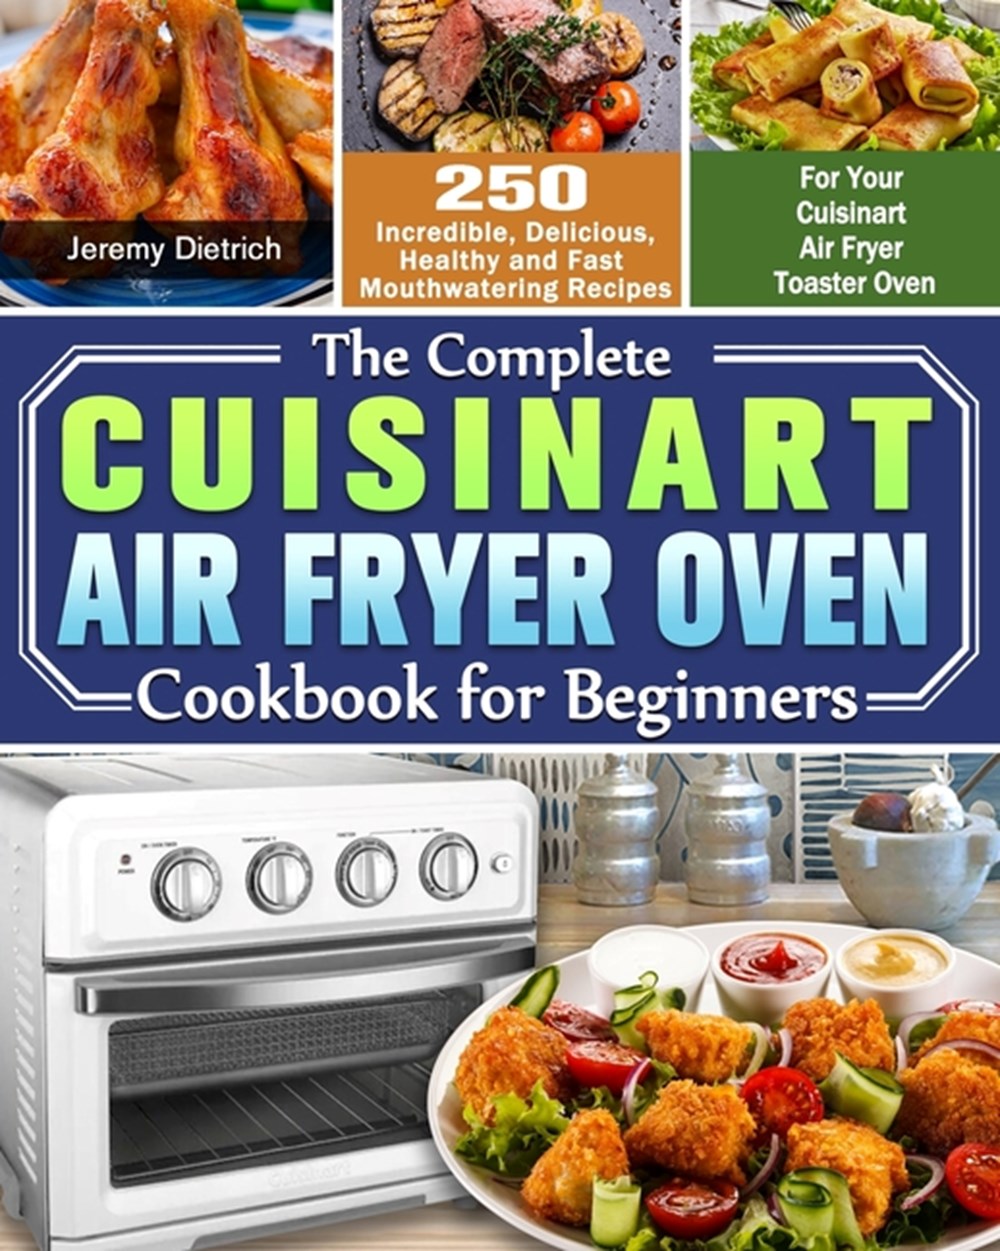 Complete Cuisinart Air Fryer Oven Cookbook for Beginners: 250 Incredible, Delicious, Healthy and Fas